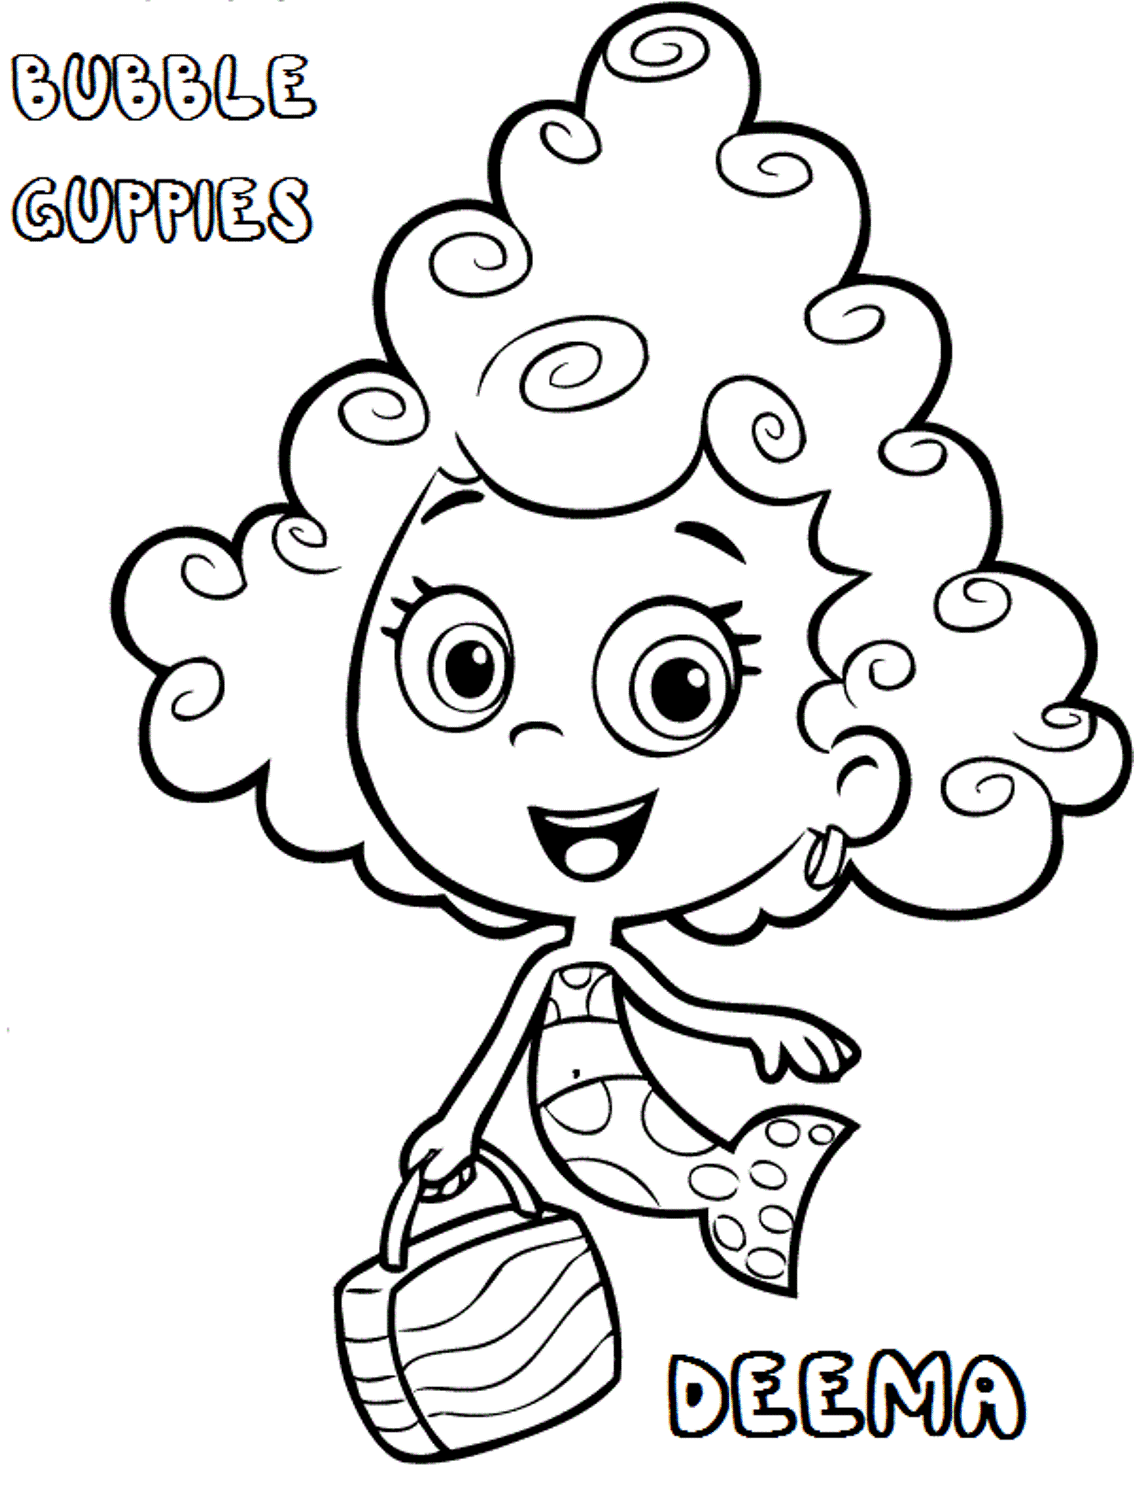 19 Free Pictures for: Bubble Guppies Coloring Pages. Temoon.us